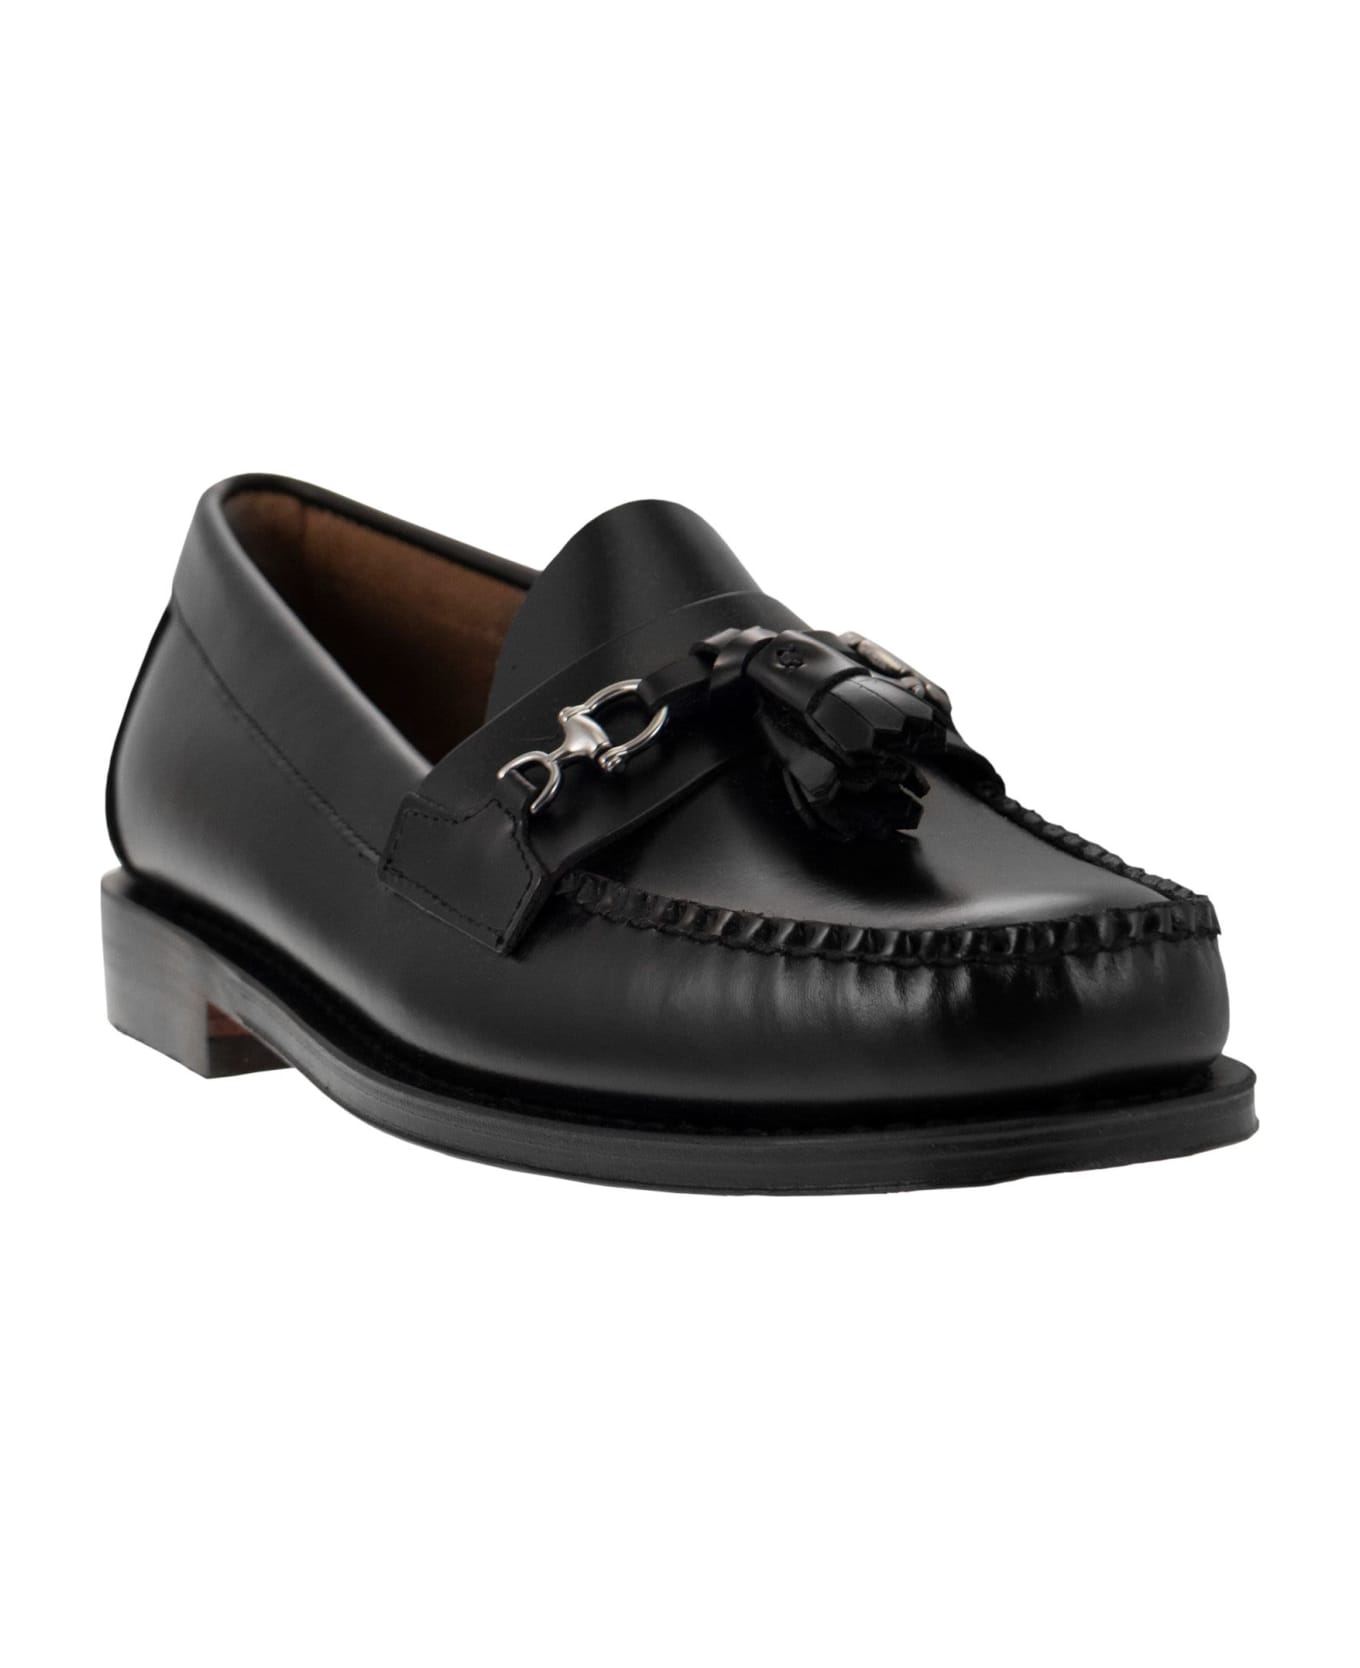 G.H.Bass & Co. Weejun - Leather Moccasins With Tassels - Black